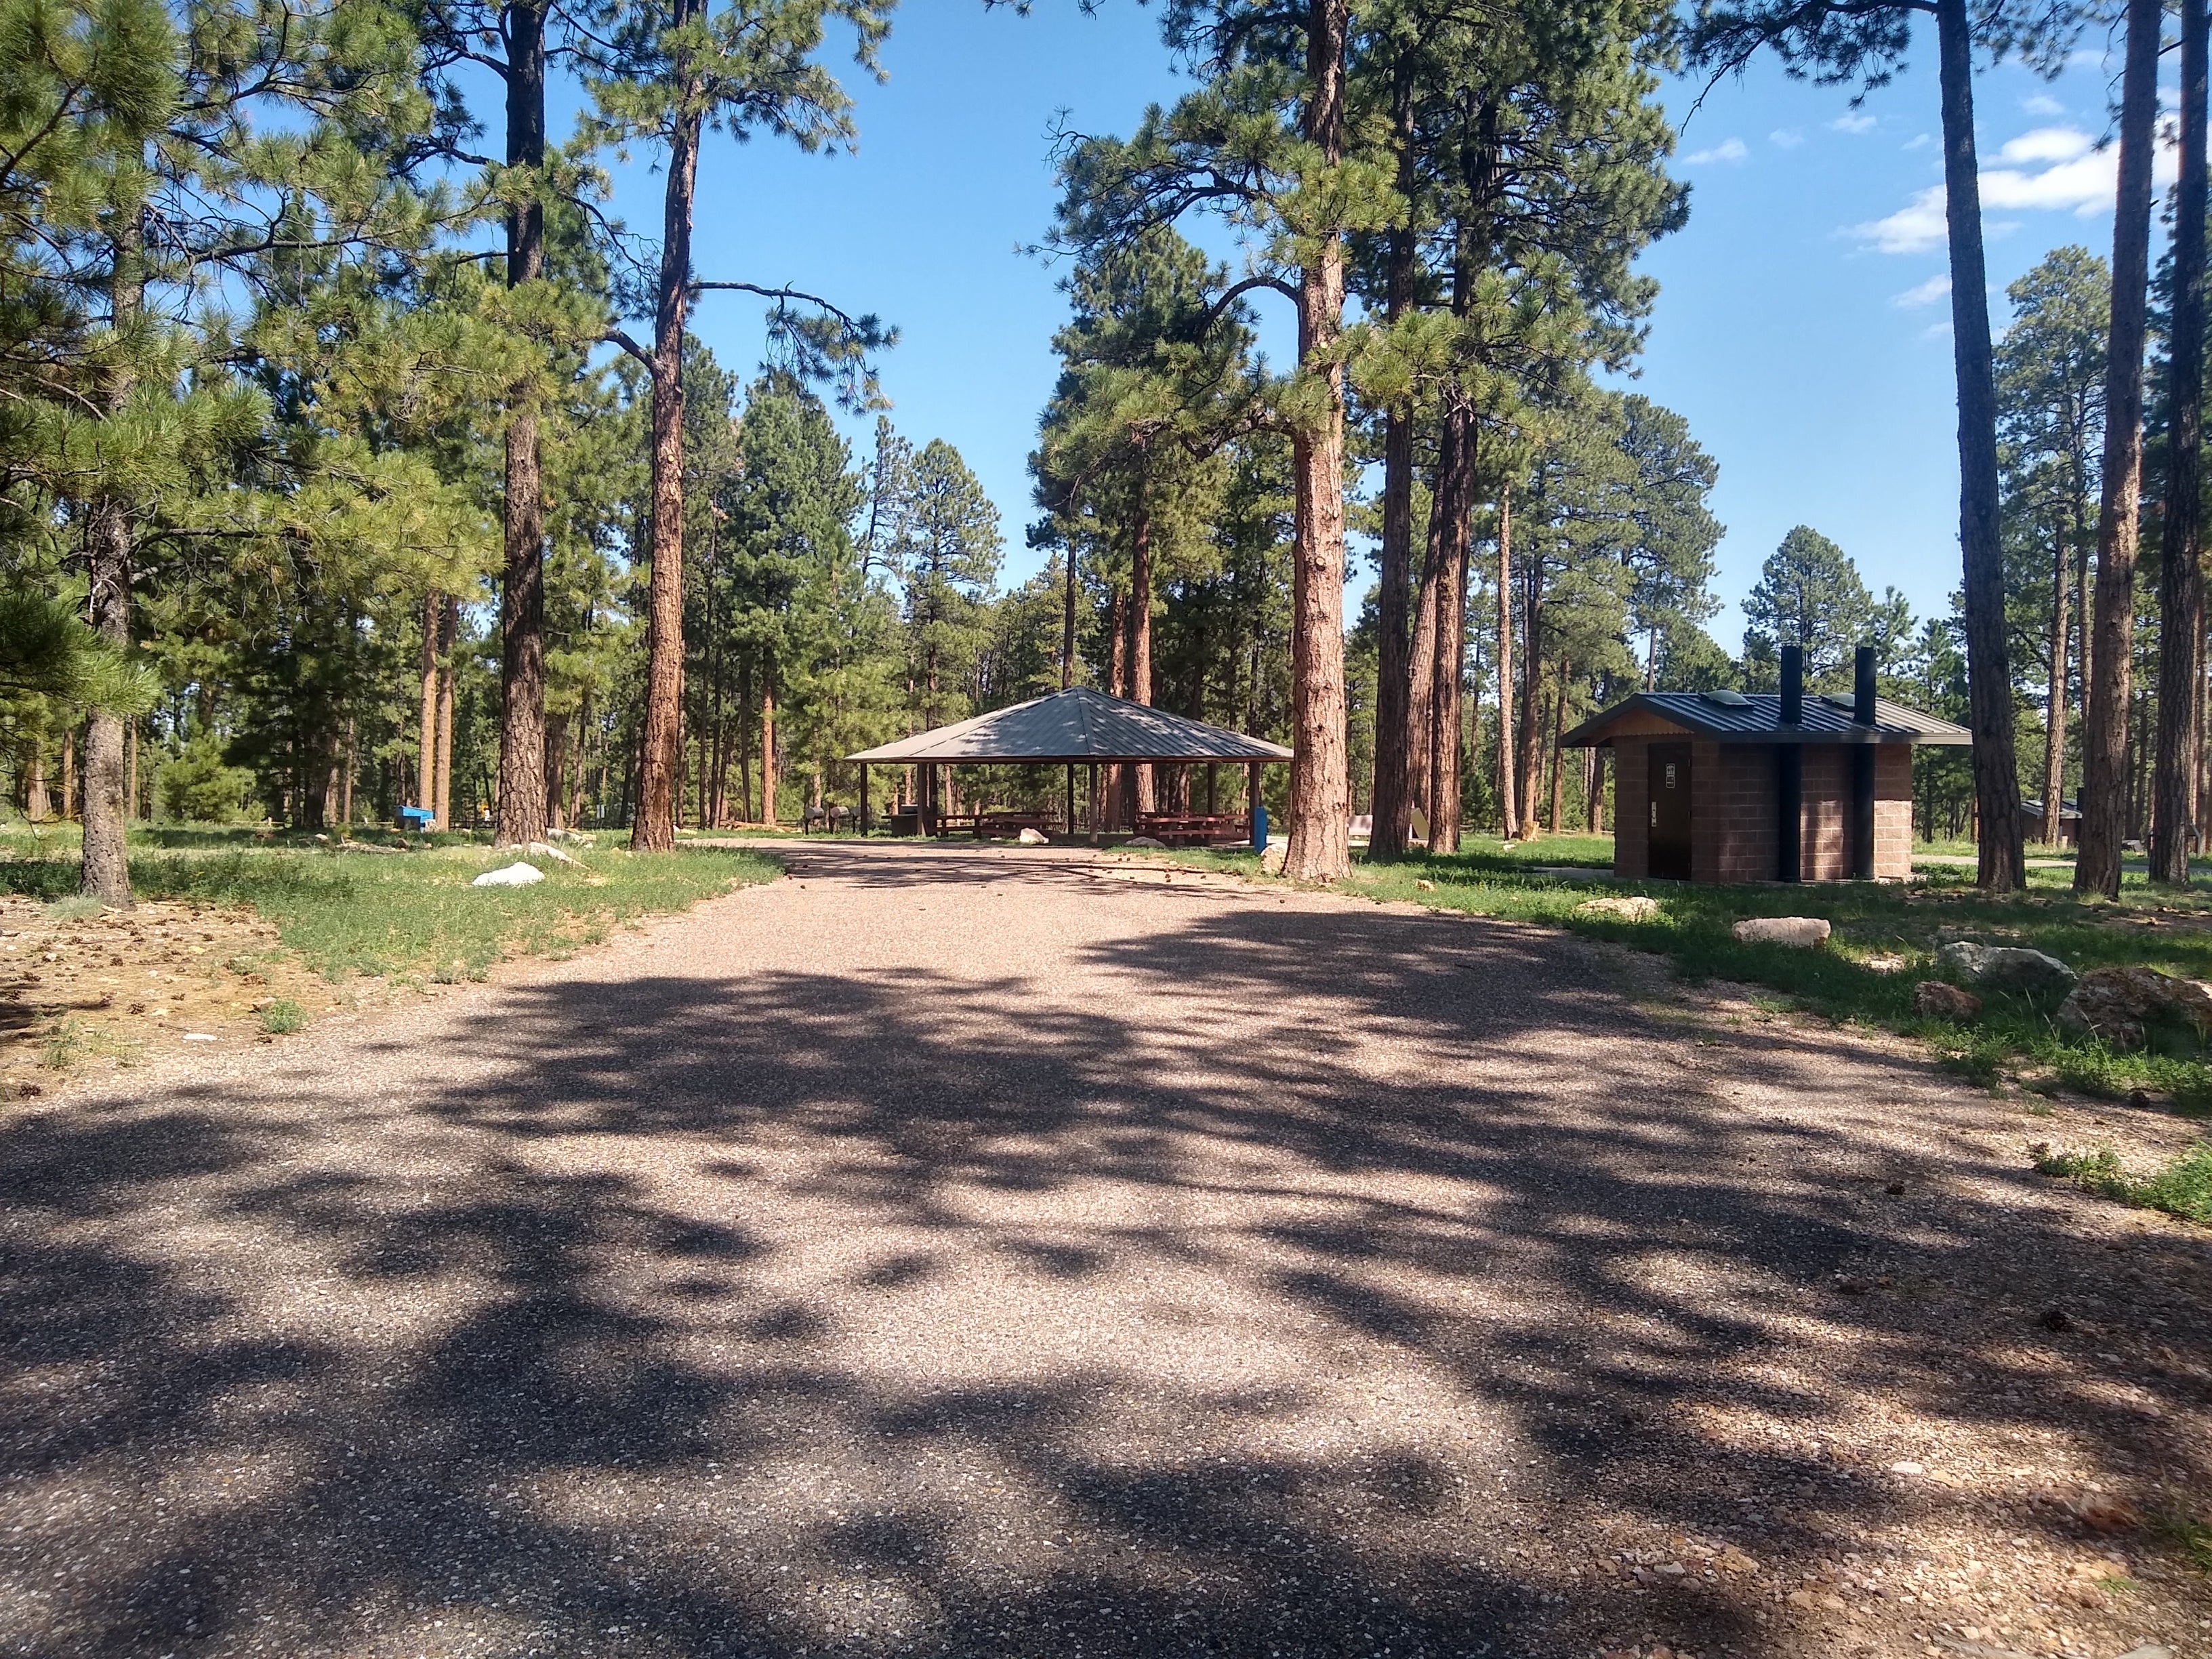 Camper submitted image from Jacob Lake Group Campground and Picnic Area - 1